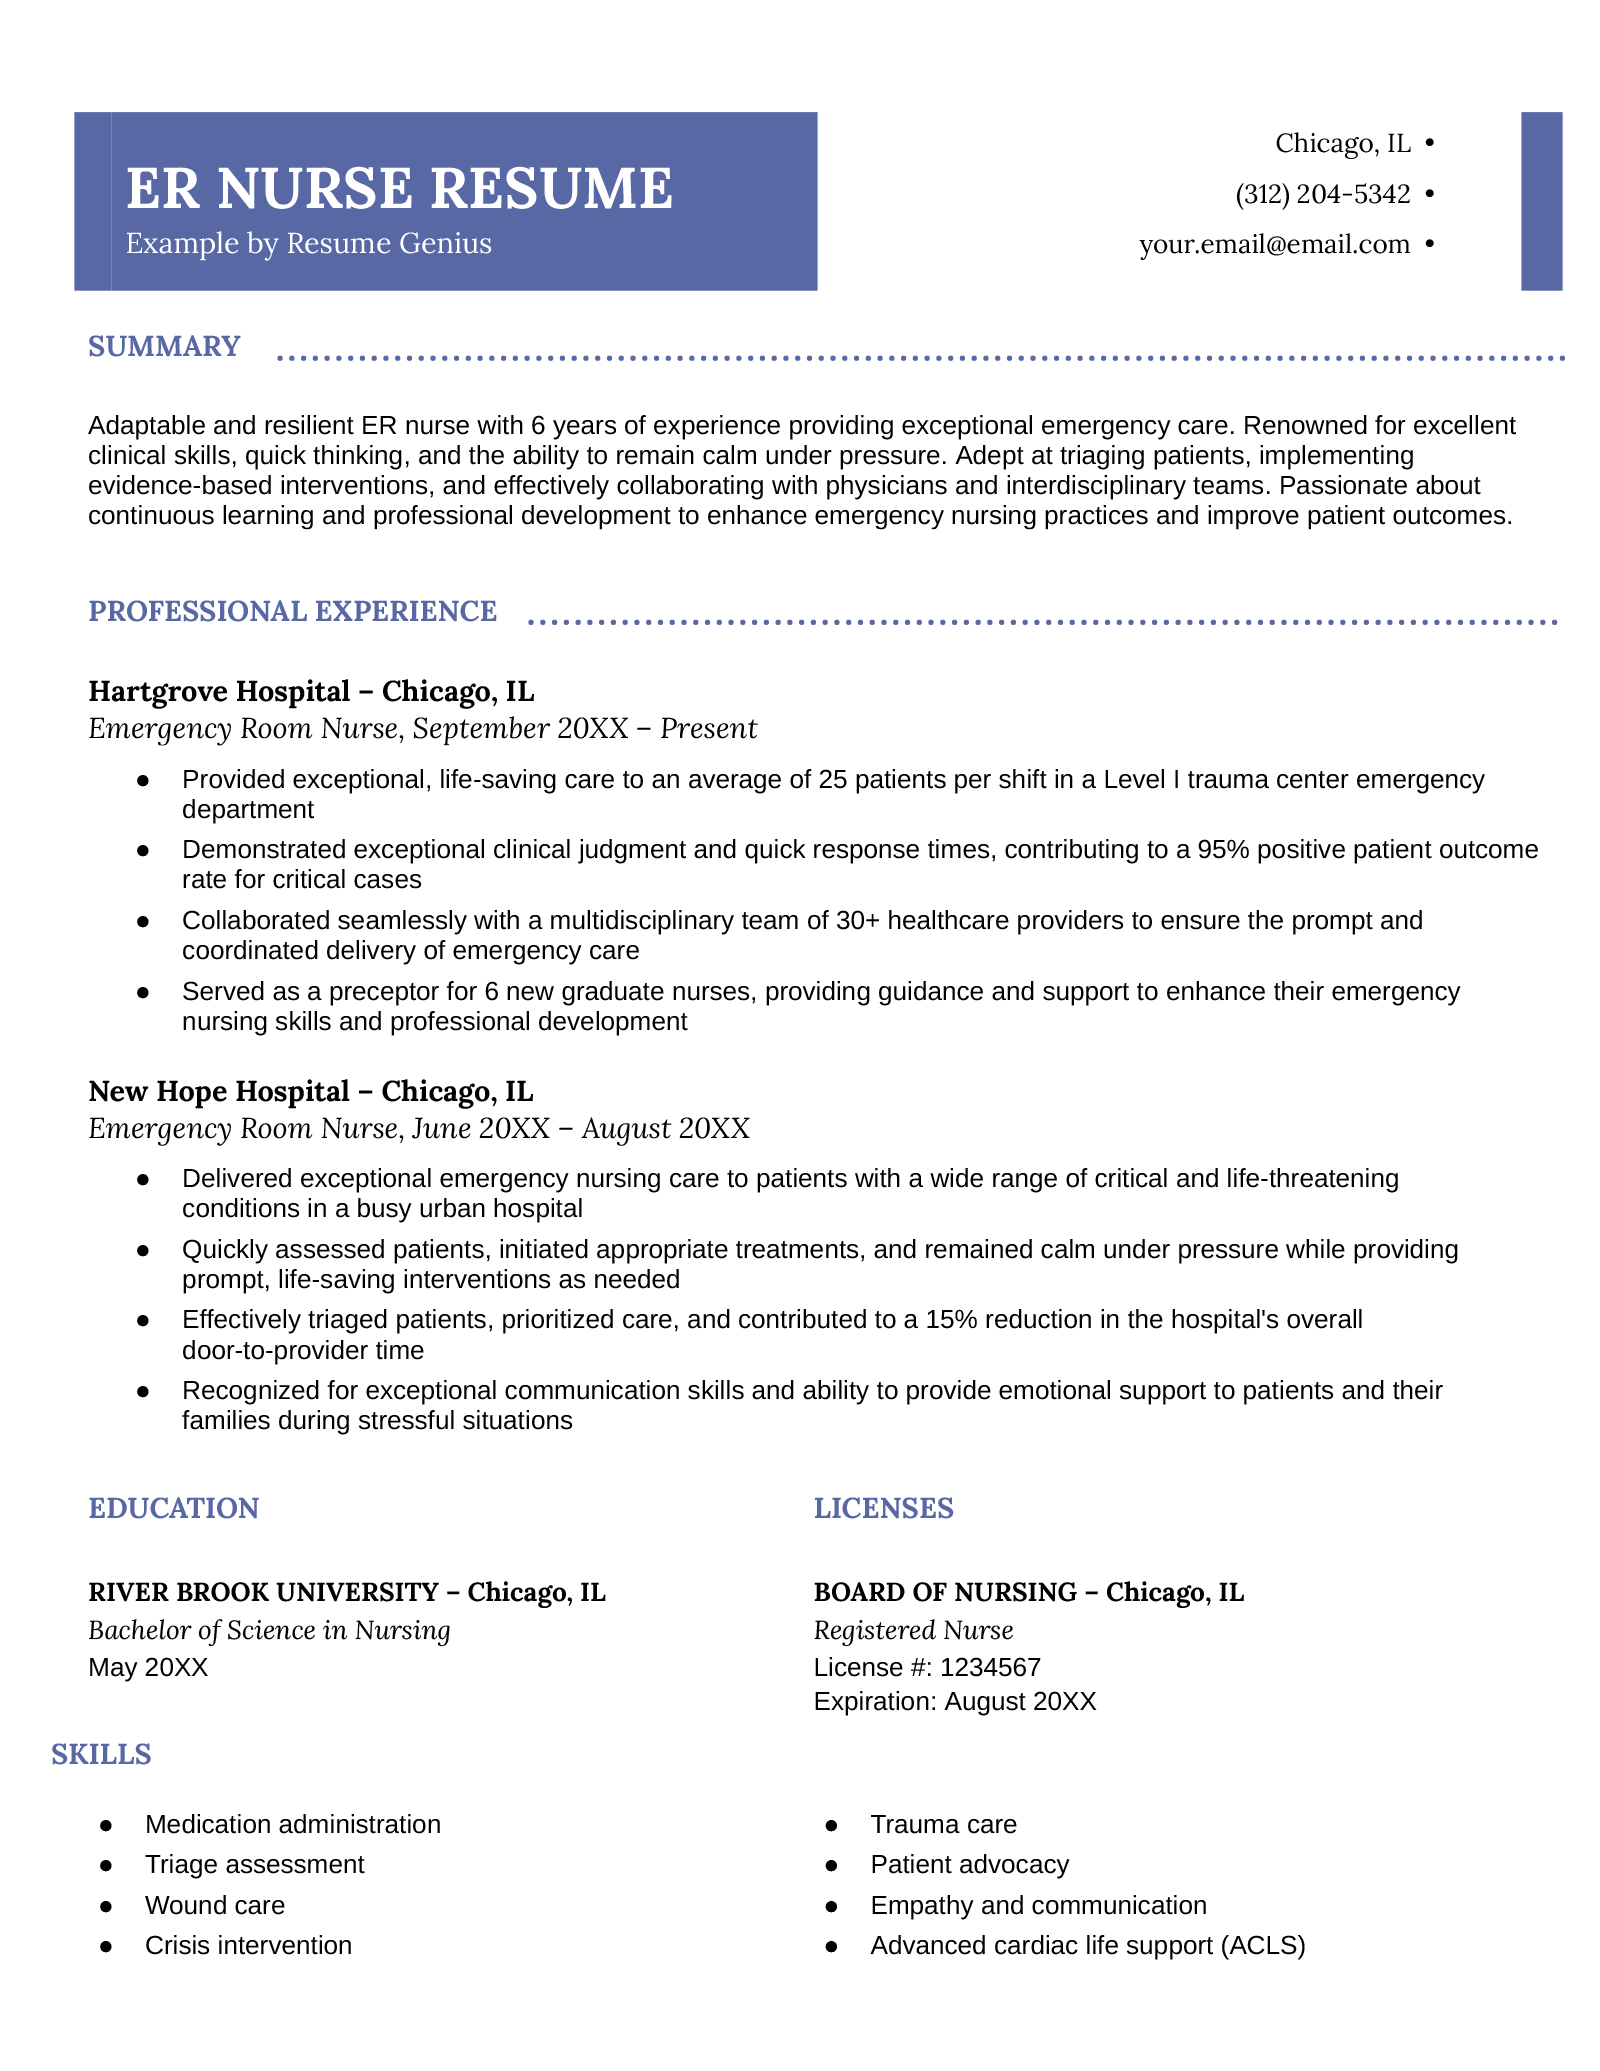 An example resume for an emergency room nurse.